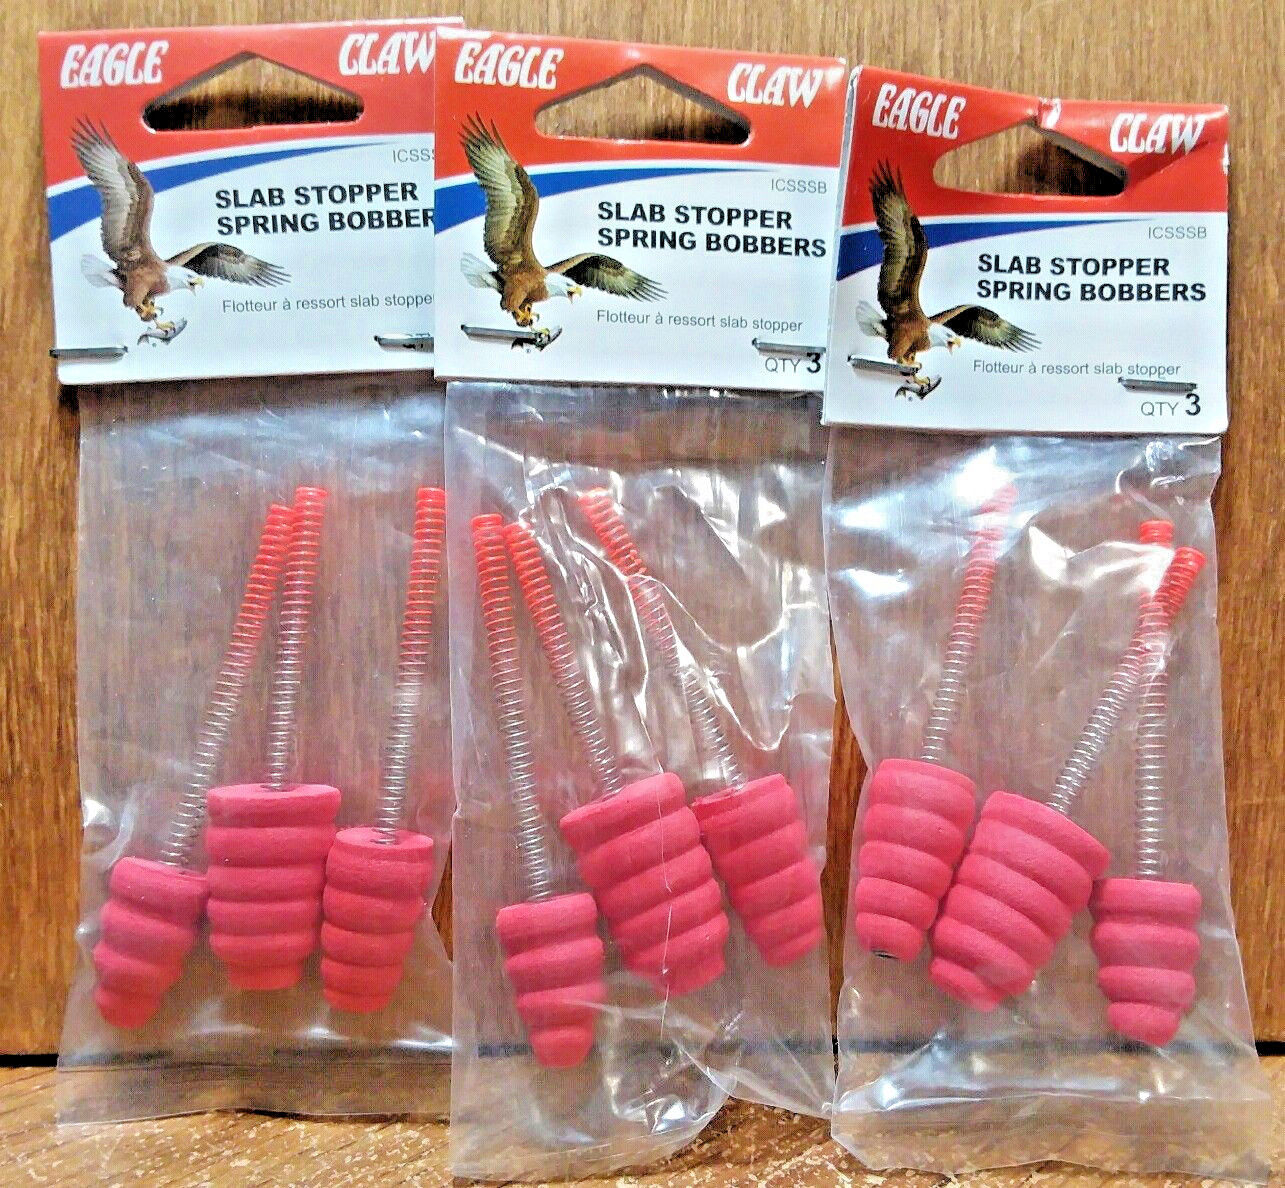 ☆ BEST DEAL☆ 3x 3pks Eagle Claw Ice Fishing Spring Bobbers Slab Stopper Assorted Eagle Claw ICSSSB